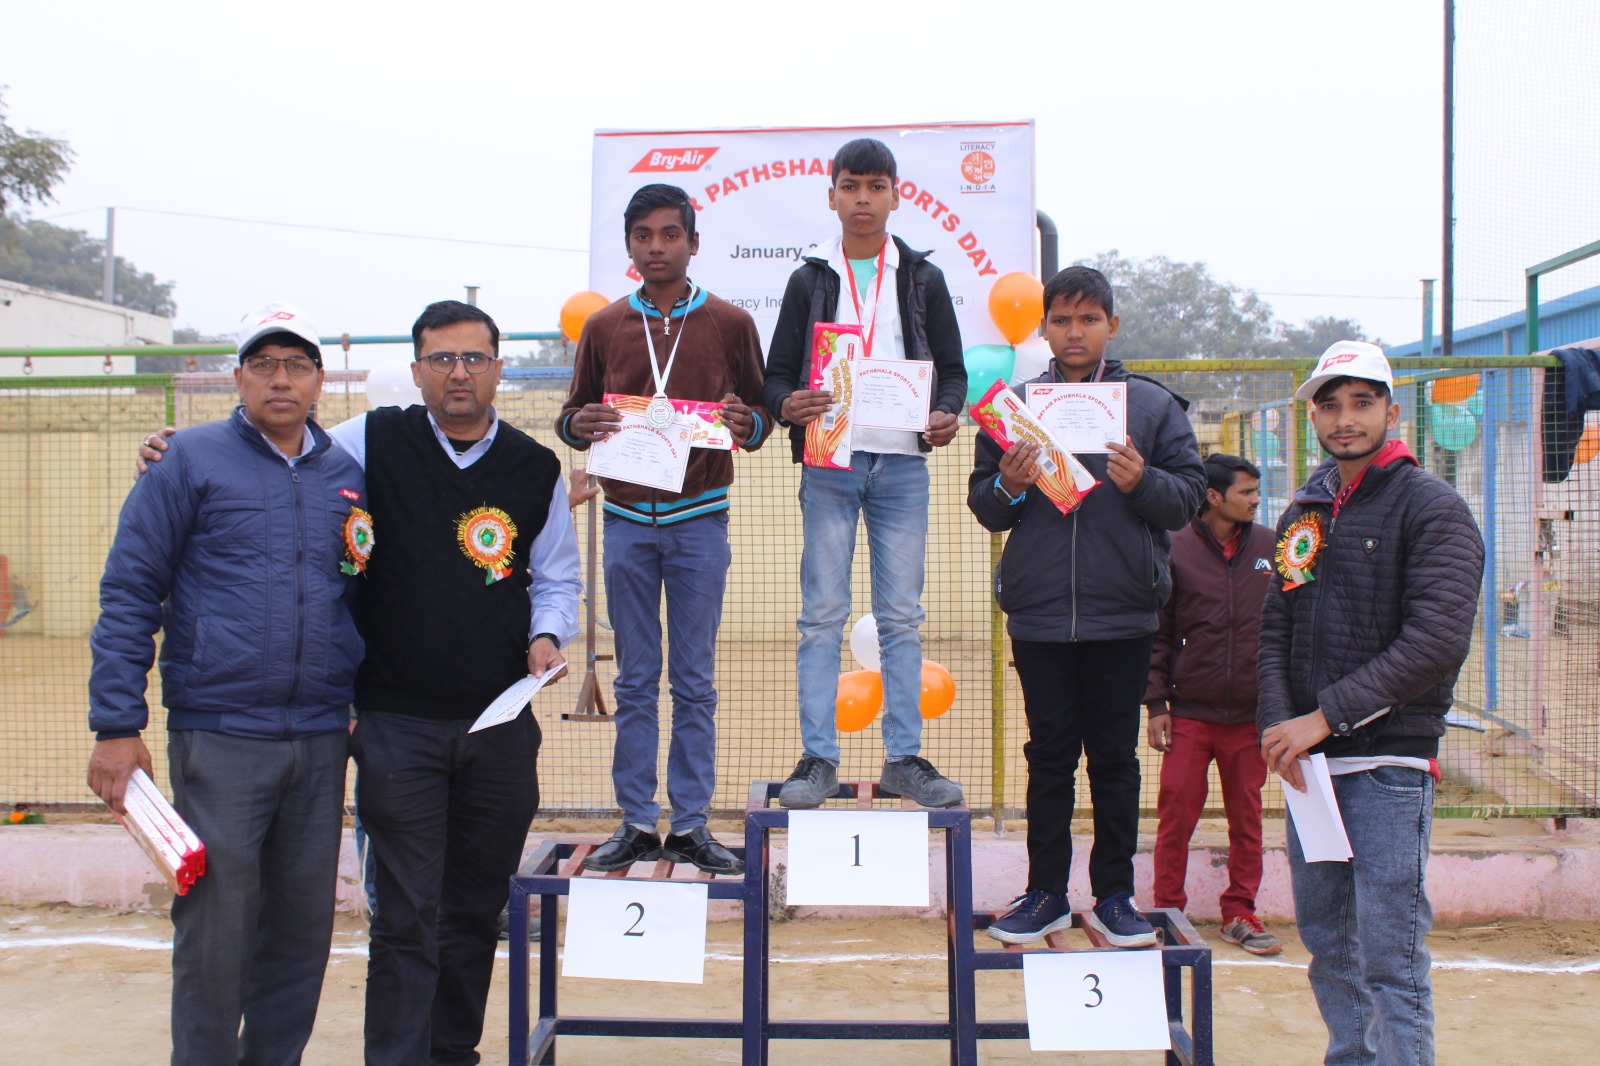 Bry-Air and DRI conduct Sports Day at Bajghera, Gurugram to celebrate International Day of Education